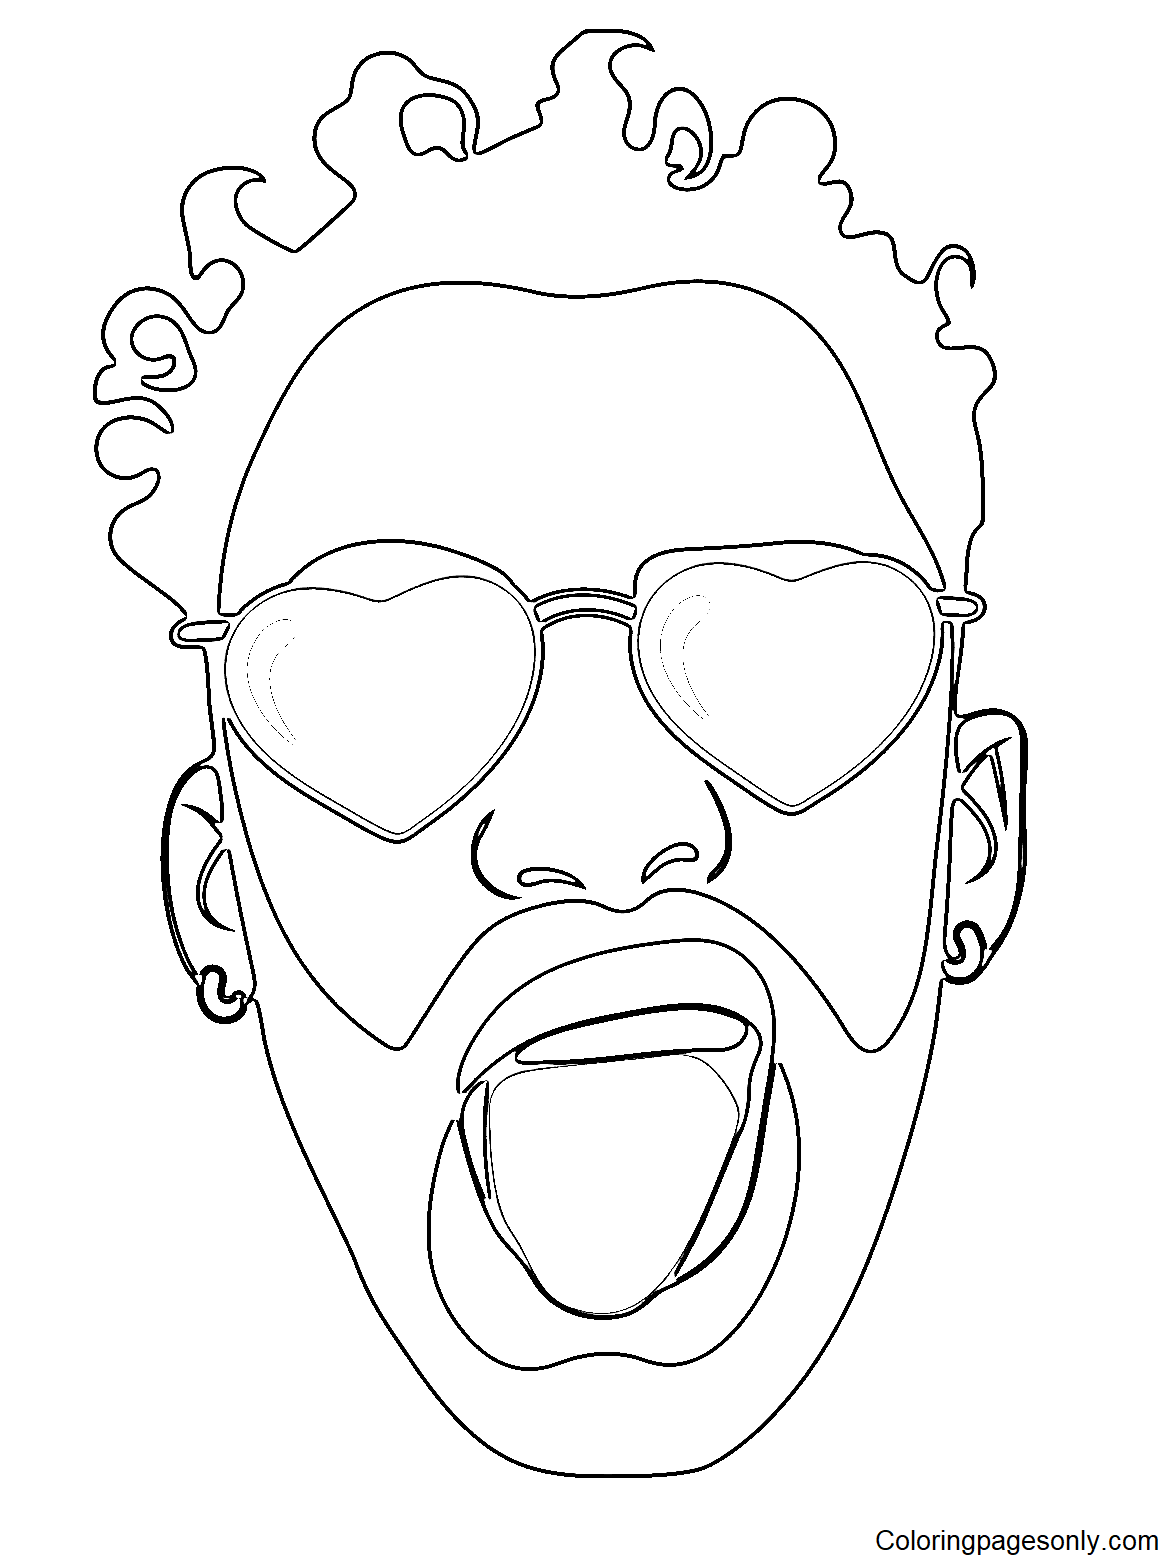 Bad Bunny with Heart Sunglasses Coloring Page